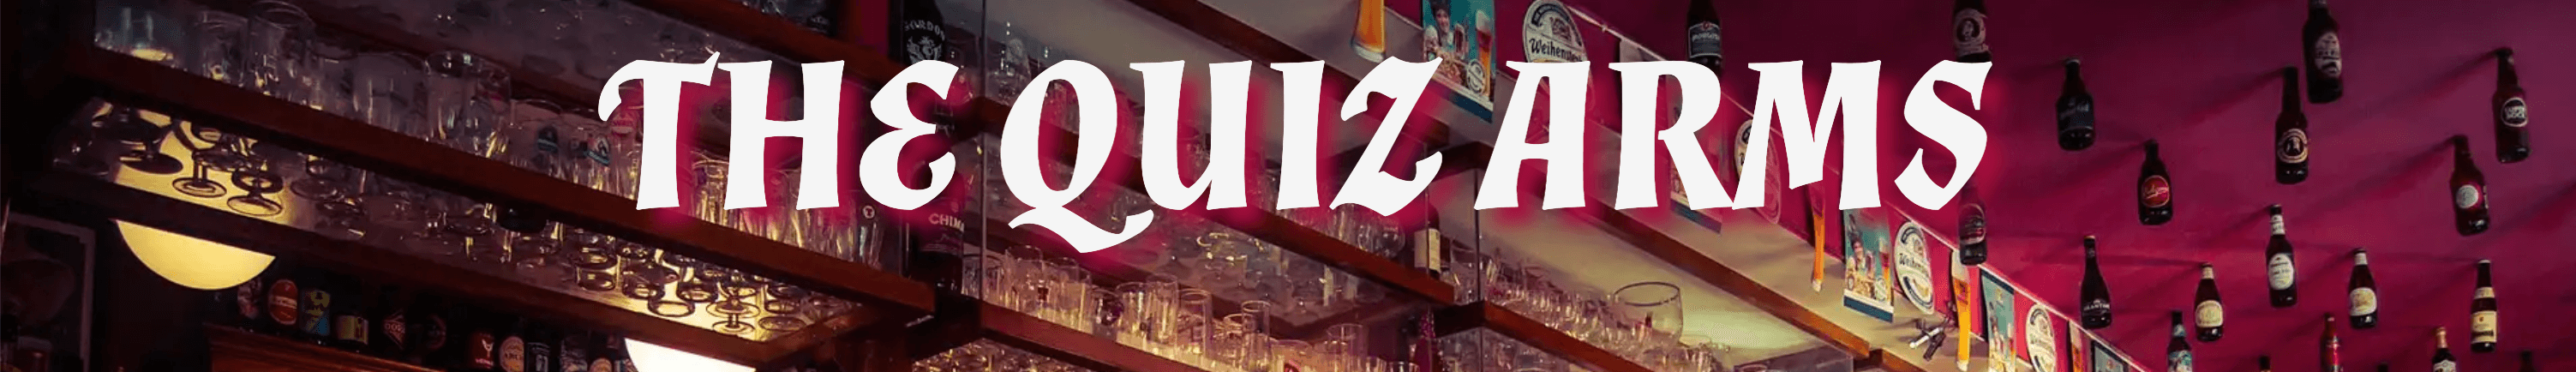 the-quiz-arms-banner.png